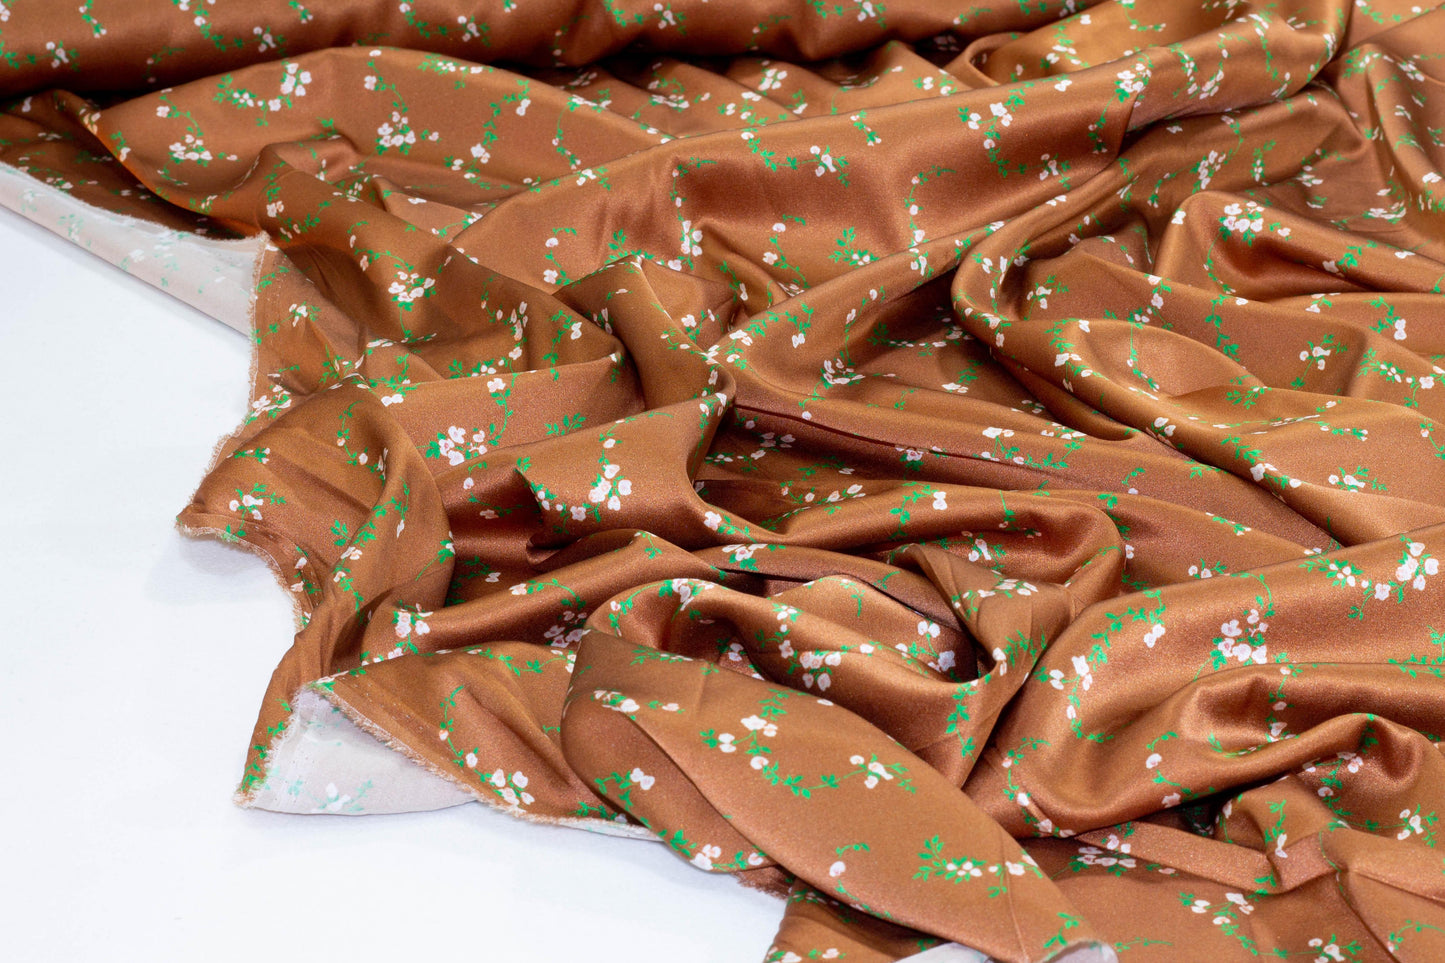 Brown Floral Stretch Silk Charmeuse - Prime Fabrics